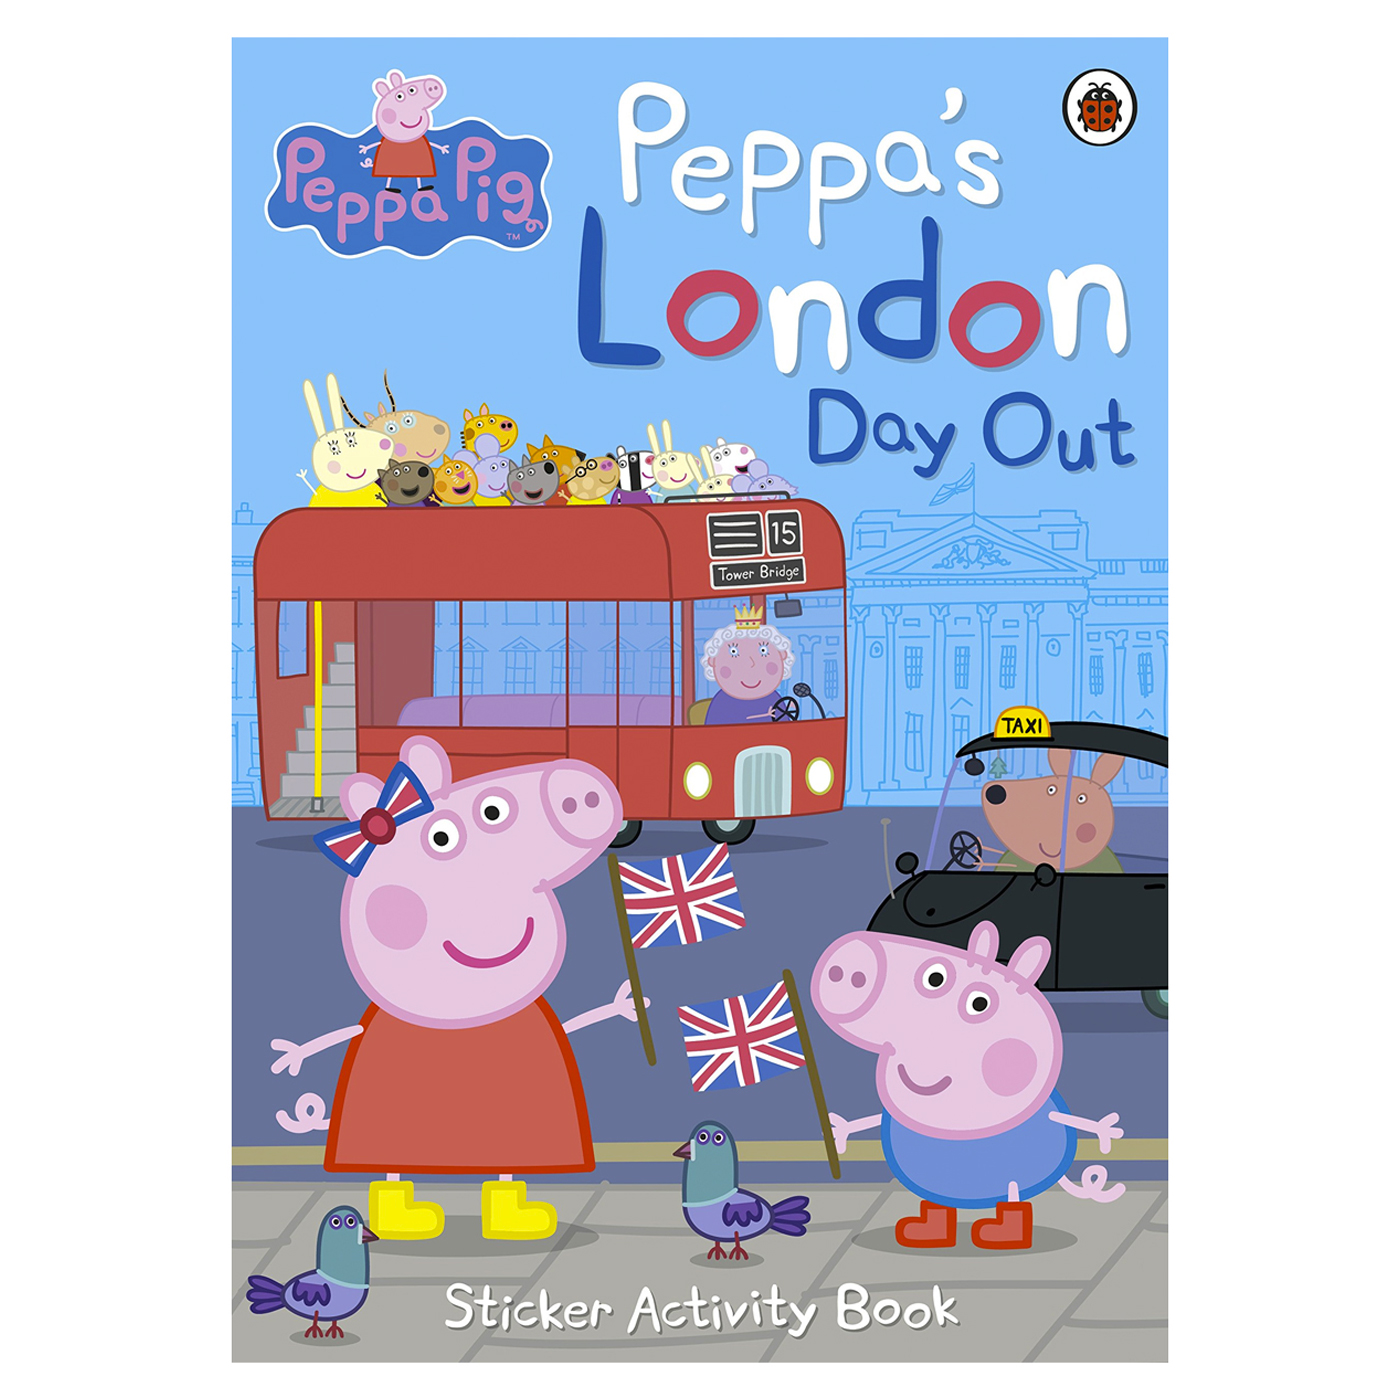  Peppa Pig: Peppa's London Day Out